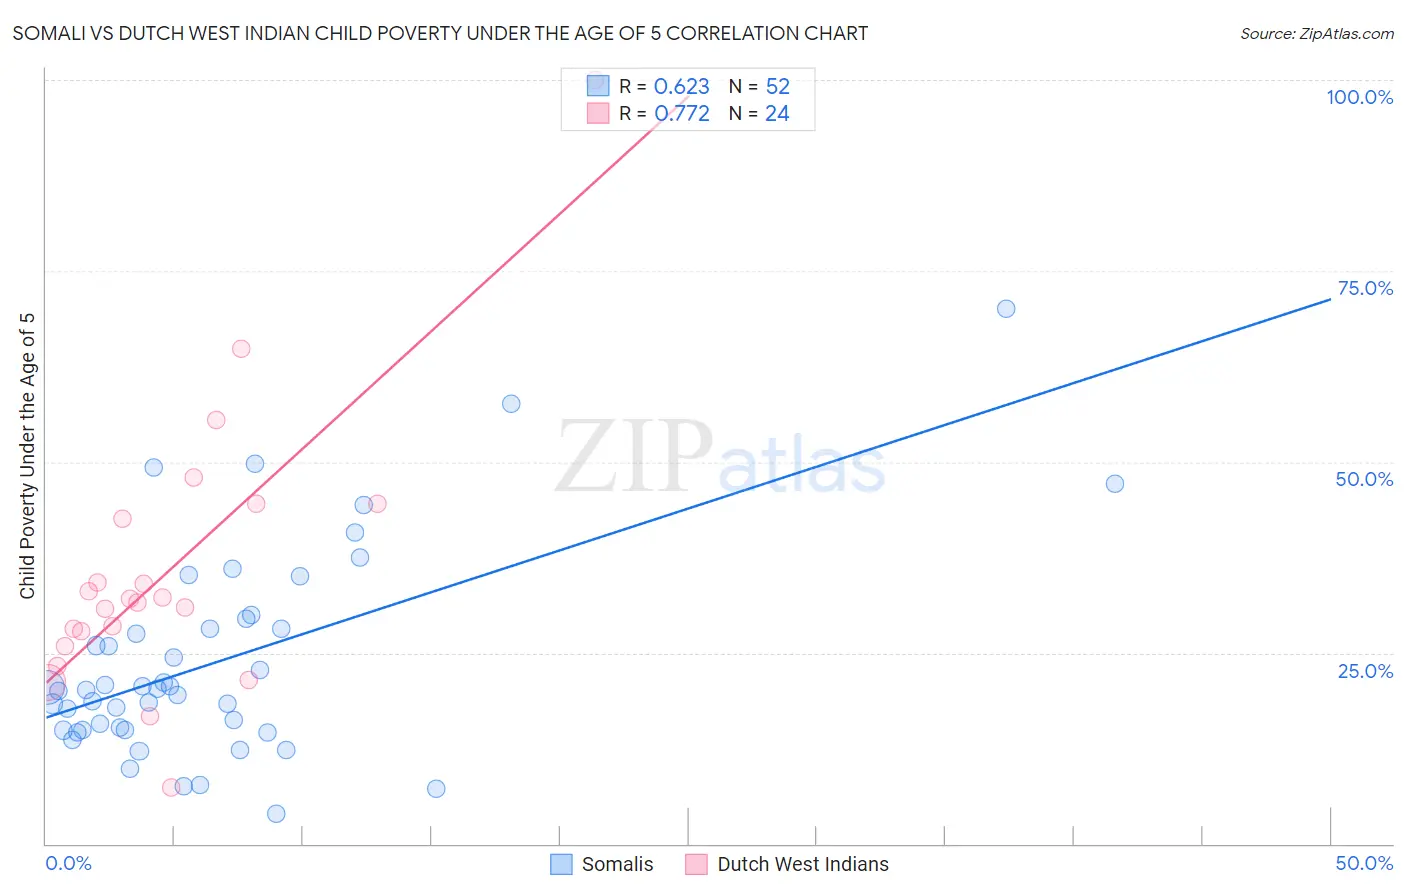 Somali vs Dutch West Indian Child Poverty Under the Age of 5